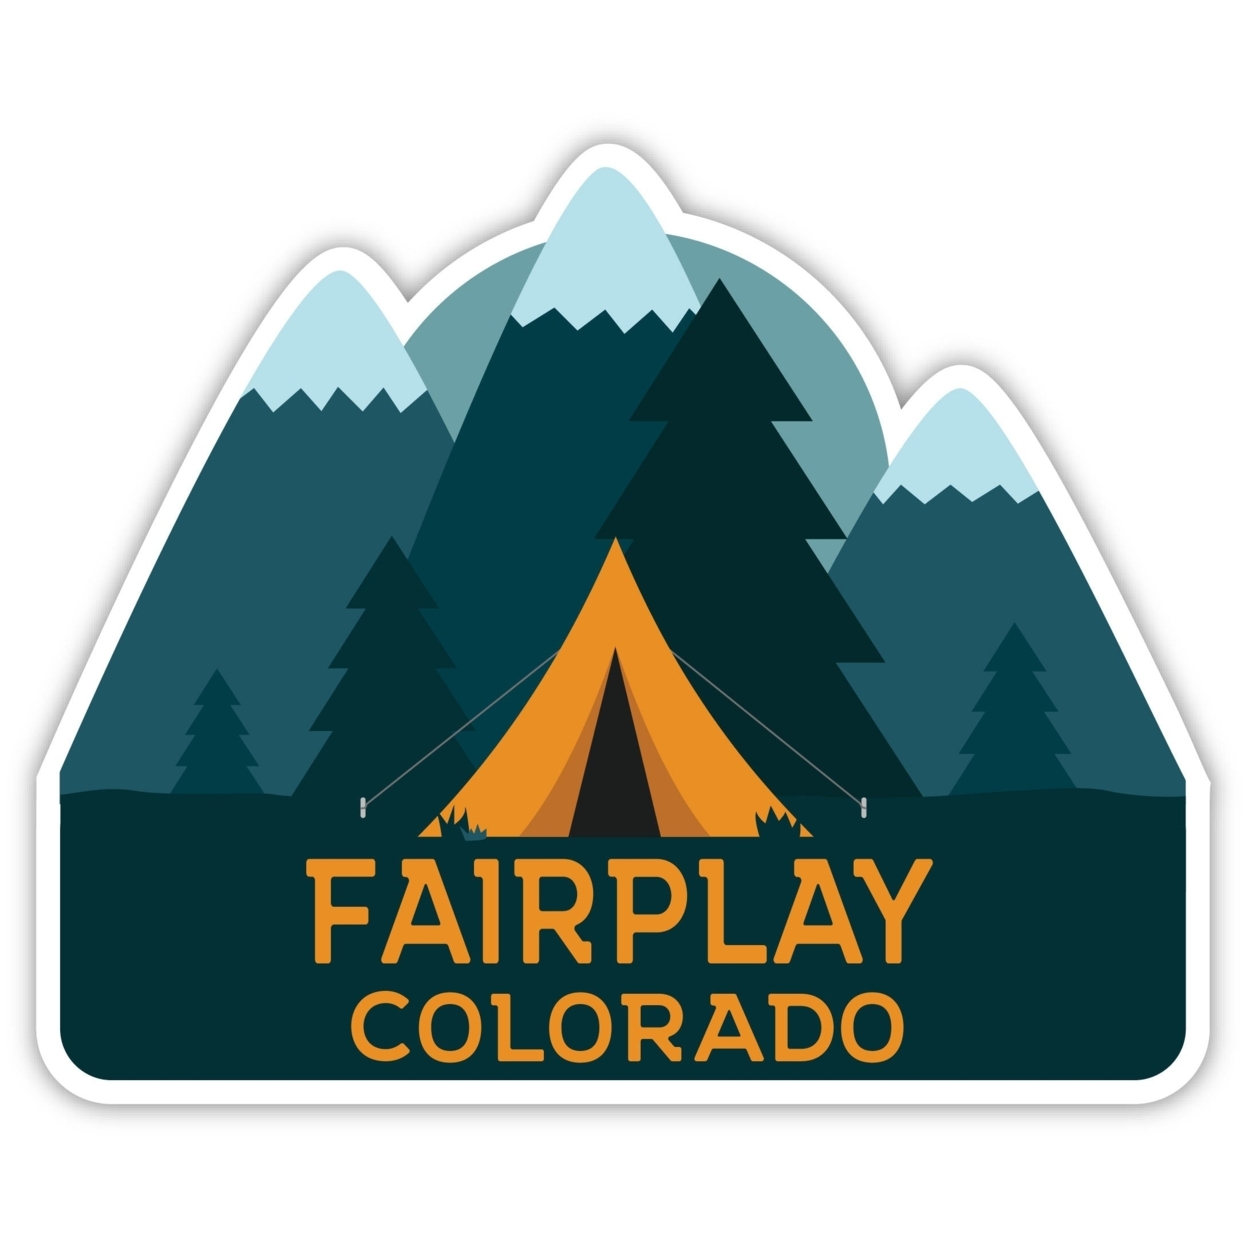 Fairplay Colorado Souvenir Decorative Stickers (Choose Theme And Size) - 4-Pack, 12-Inch, Camp Life